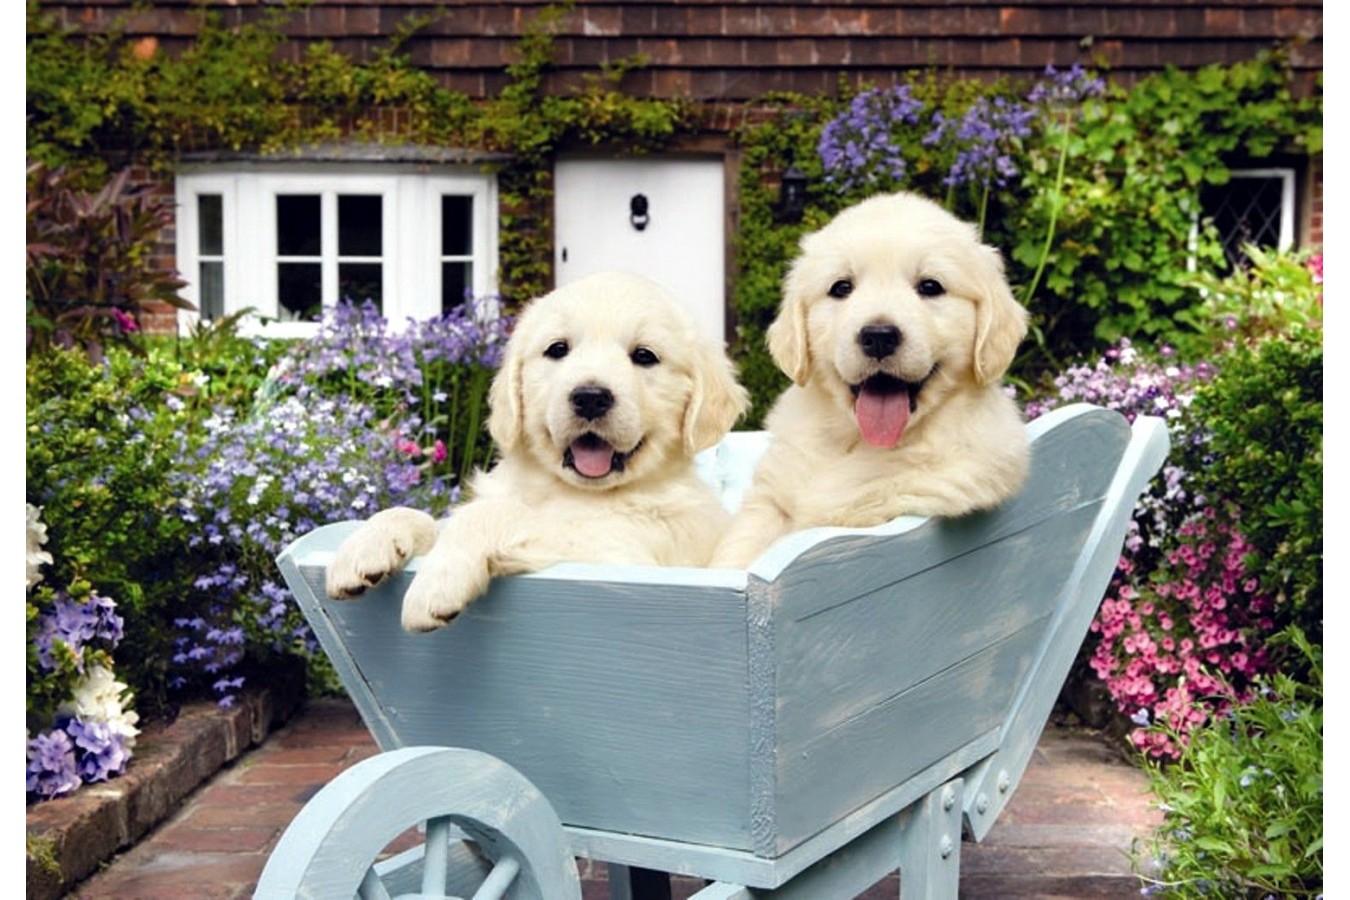 Puzzle Anatolian - Puppies In A Wheelbarrow, 260 piese (3310)